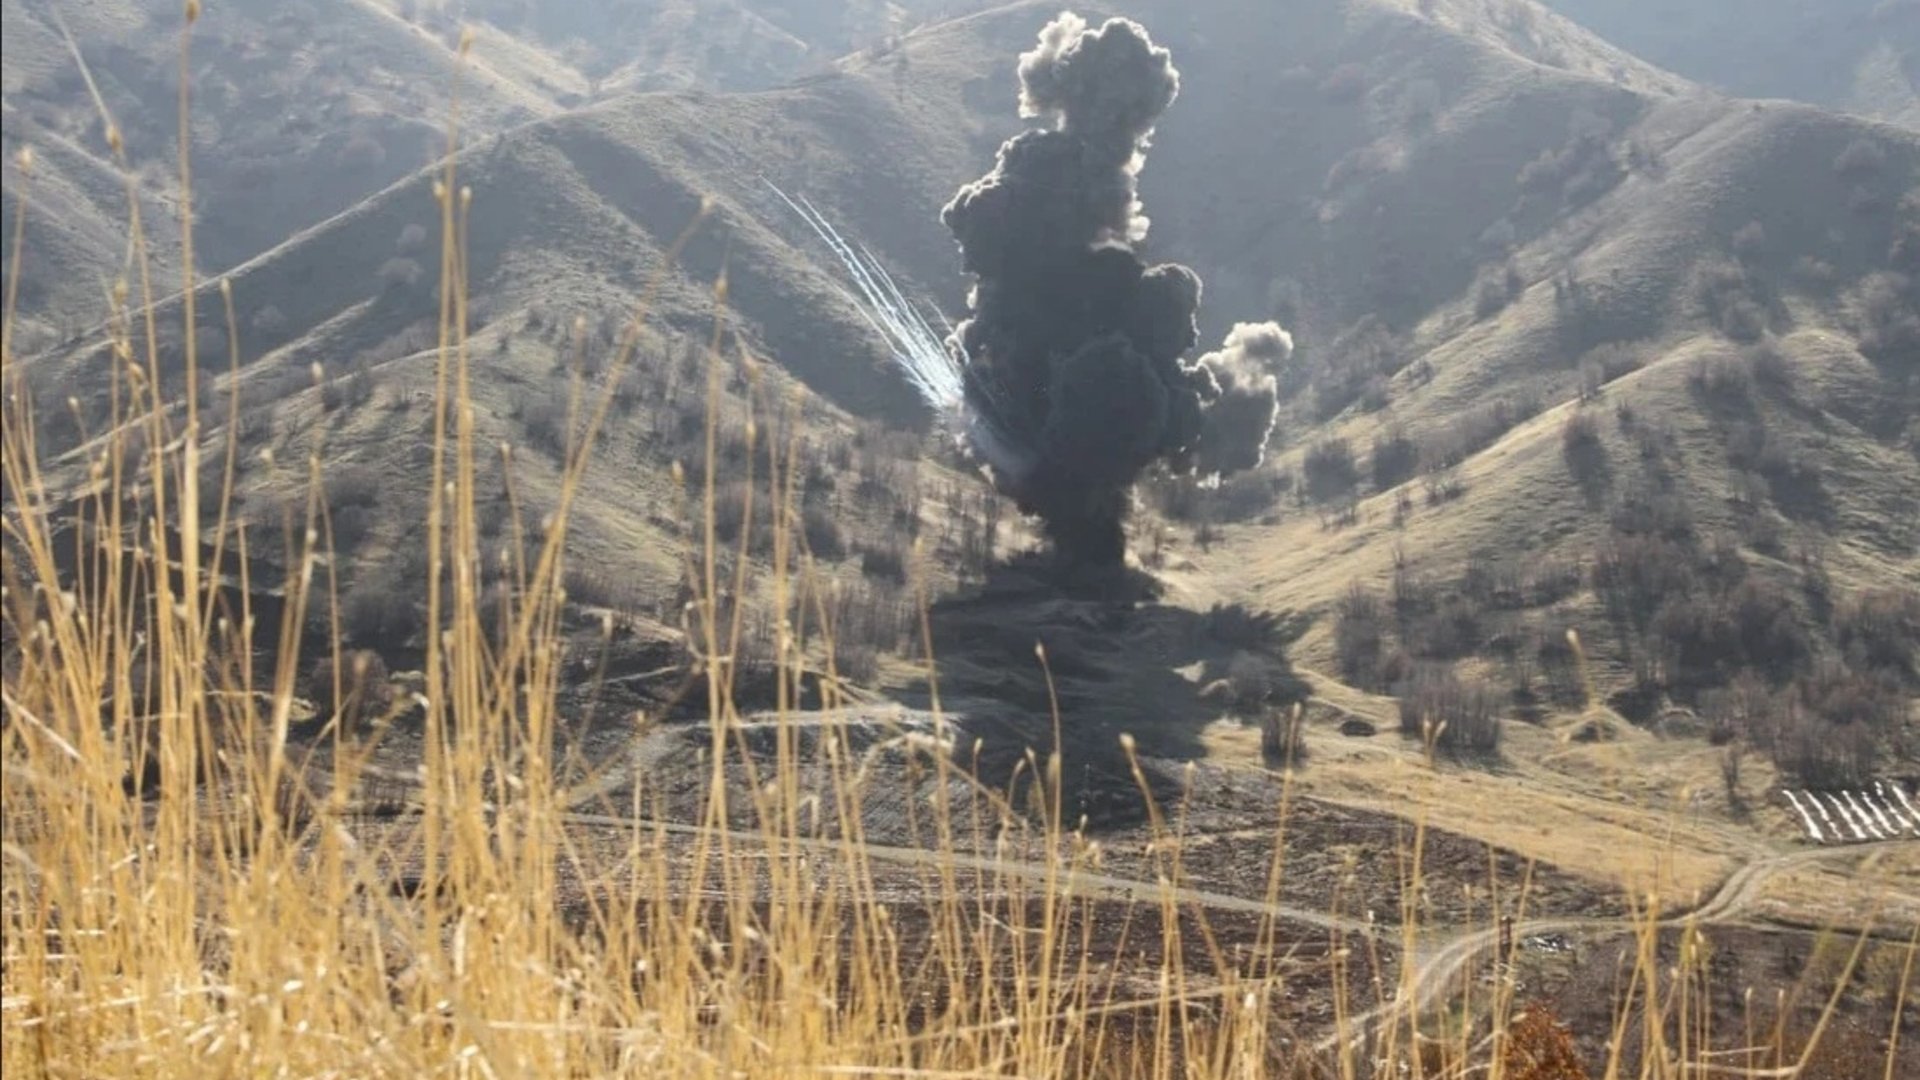 Over  mines and explosives neutralized in Duhok and Penjwen